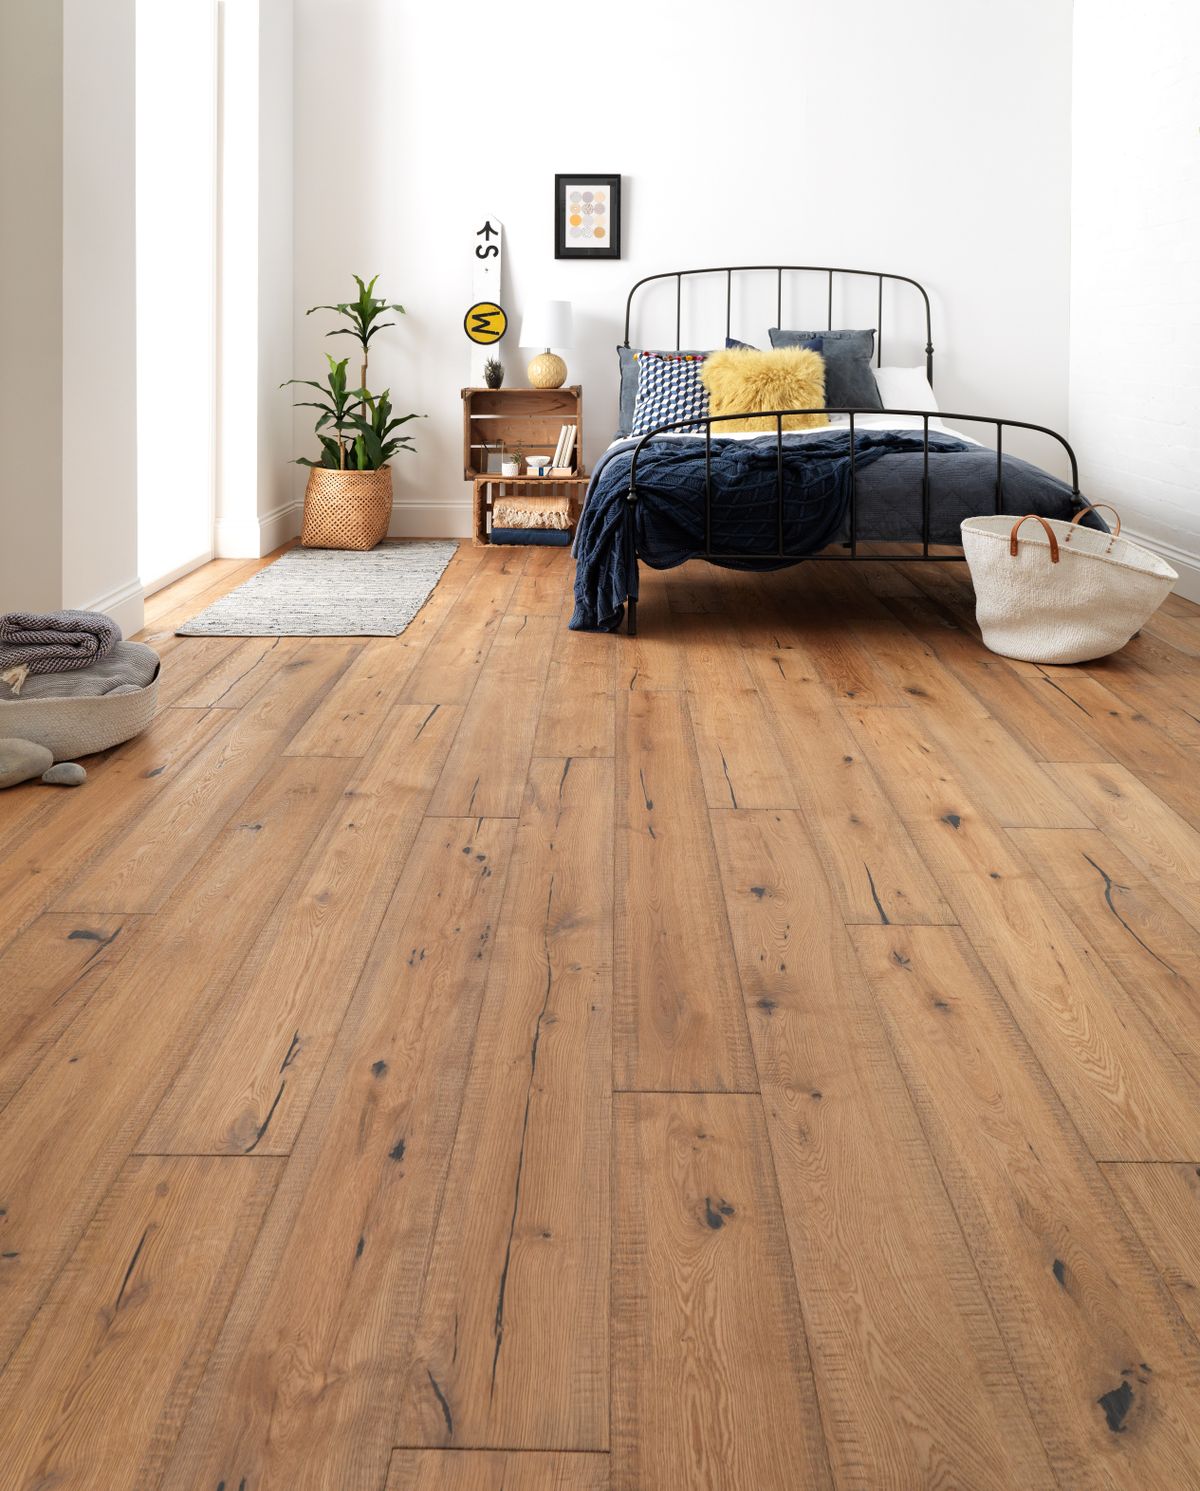 11 Types Of Flooring Materials To, Should I Put Laminate Flooring In Bedrooms